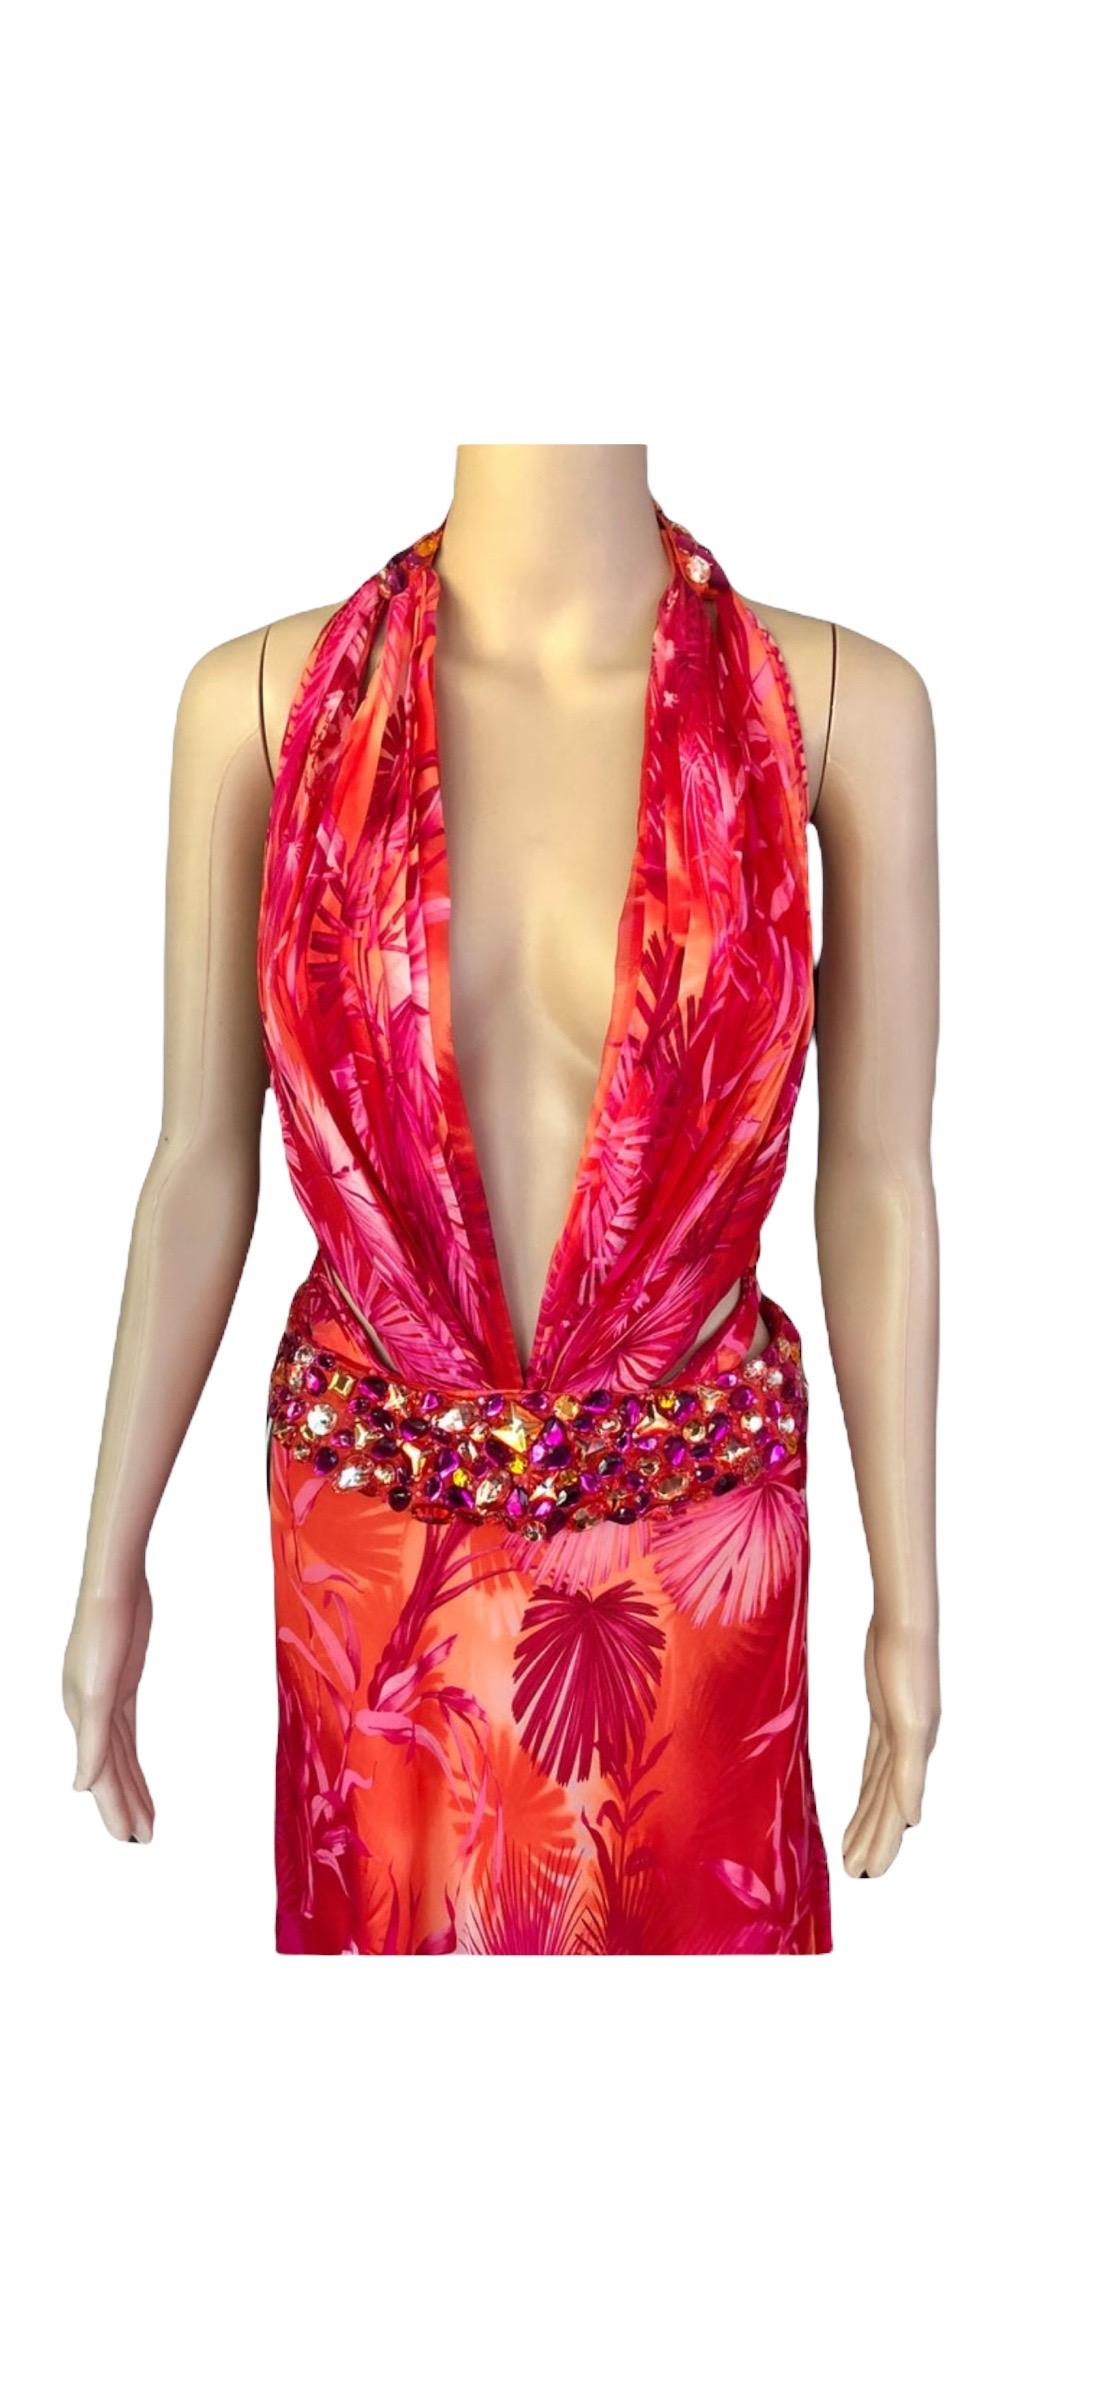 Gianni Versace S/S 2000 Runway Embellished Jungle Print Evening Dress Gown For Sale 5